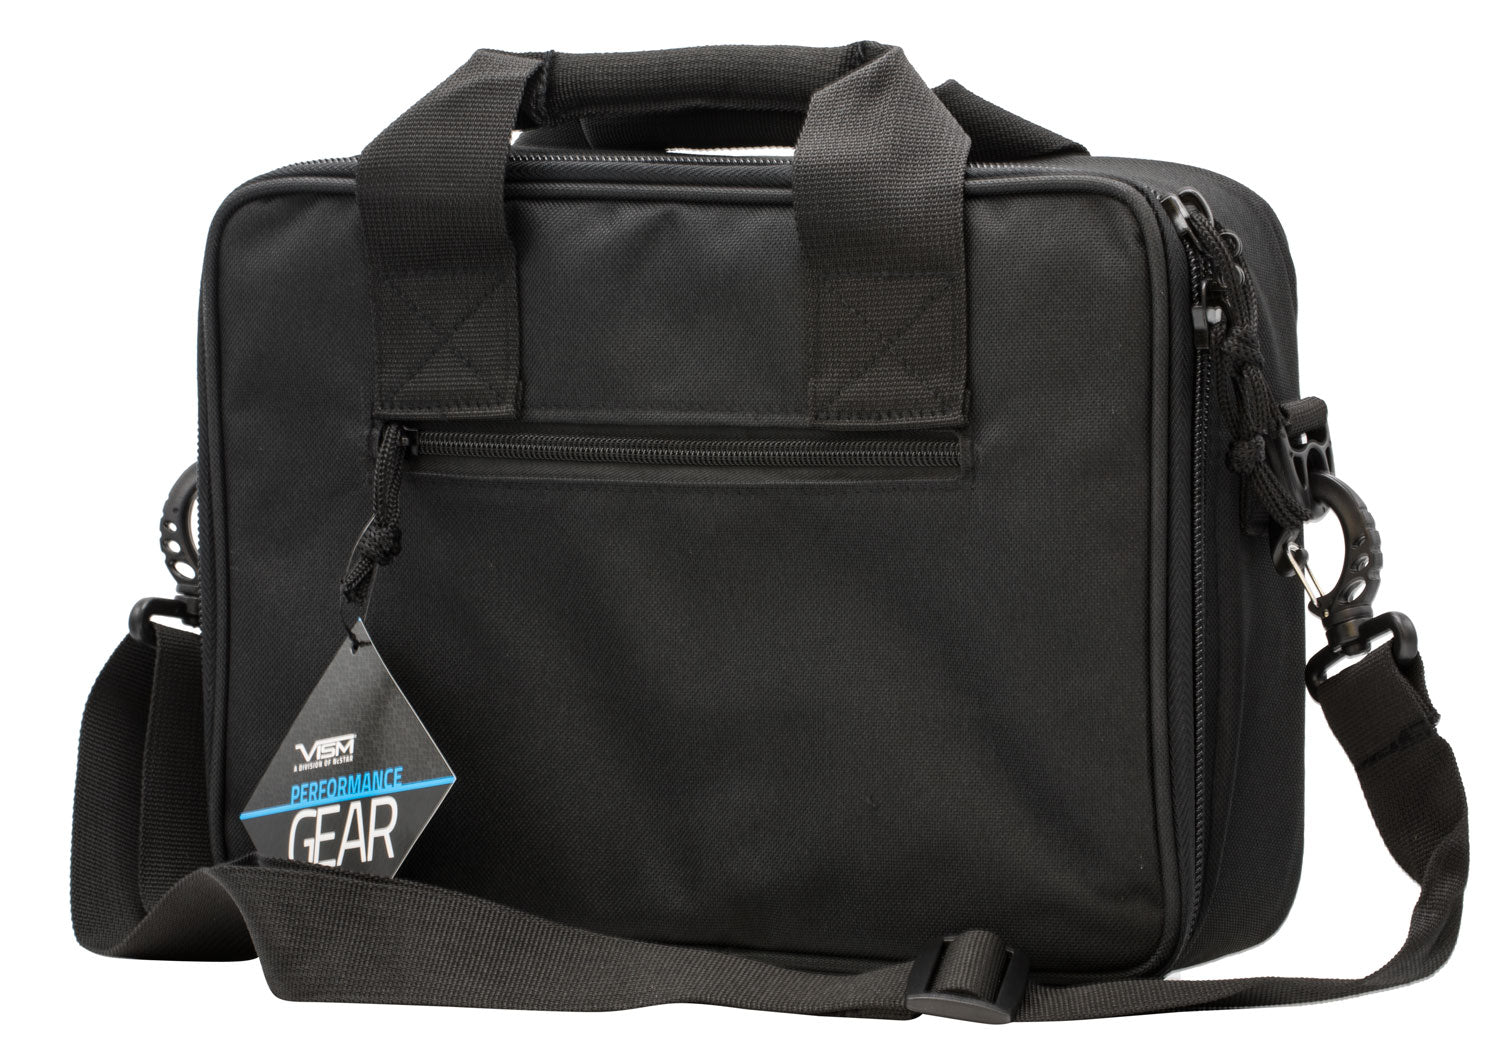 NcStar CPDX2971B VISM Double Pistol Range Bag With Mag Pouches, Loop Fasteners, Zippers, Padding & Black Finish